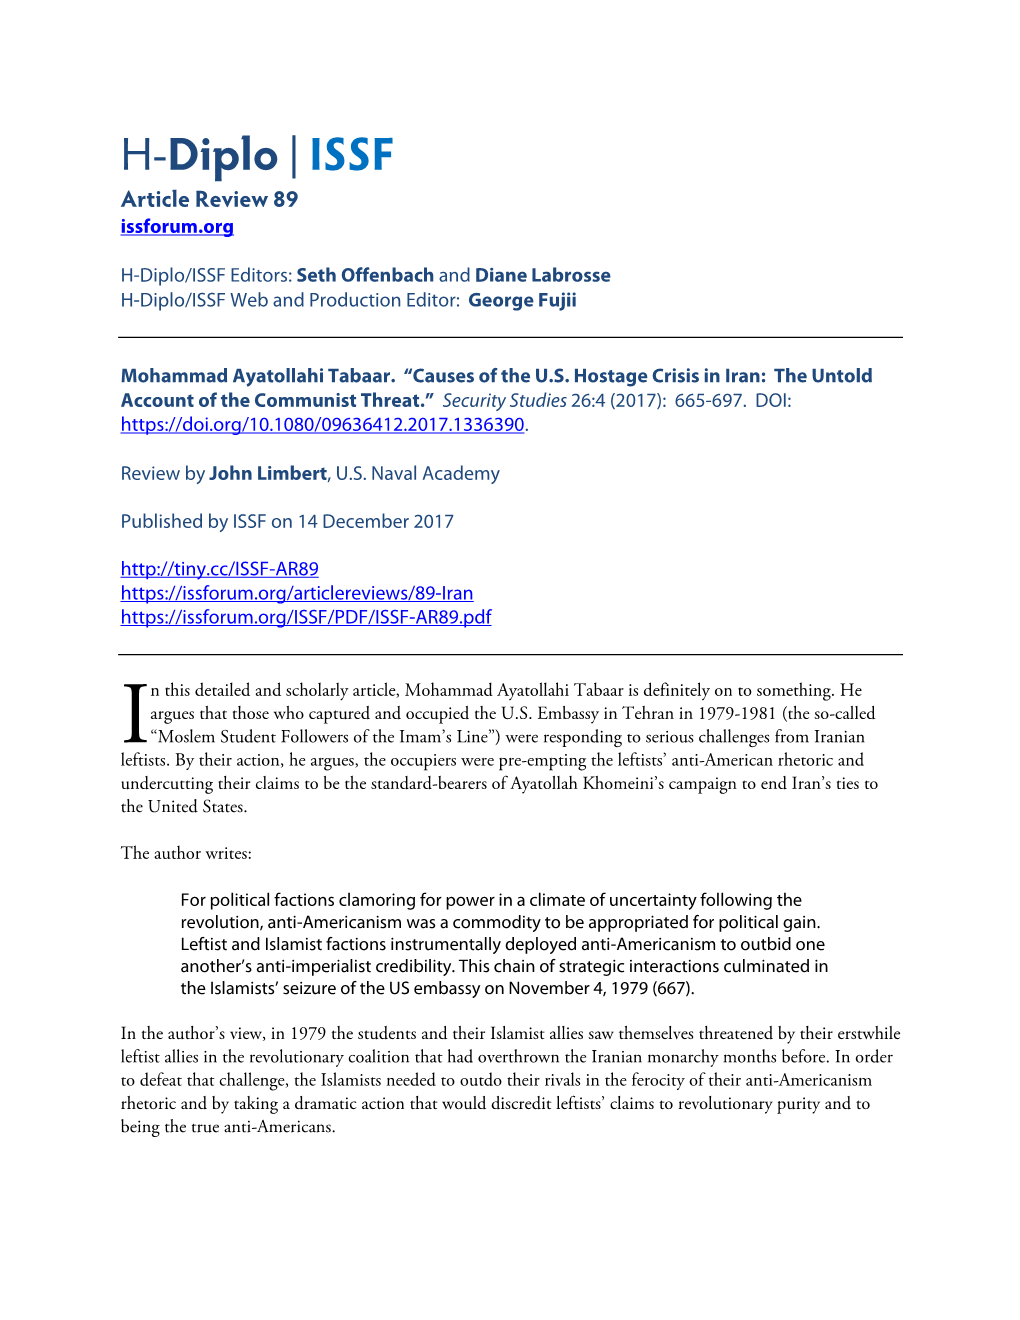 H-Diplo | ISSF Article Review 89 Issforum.Org